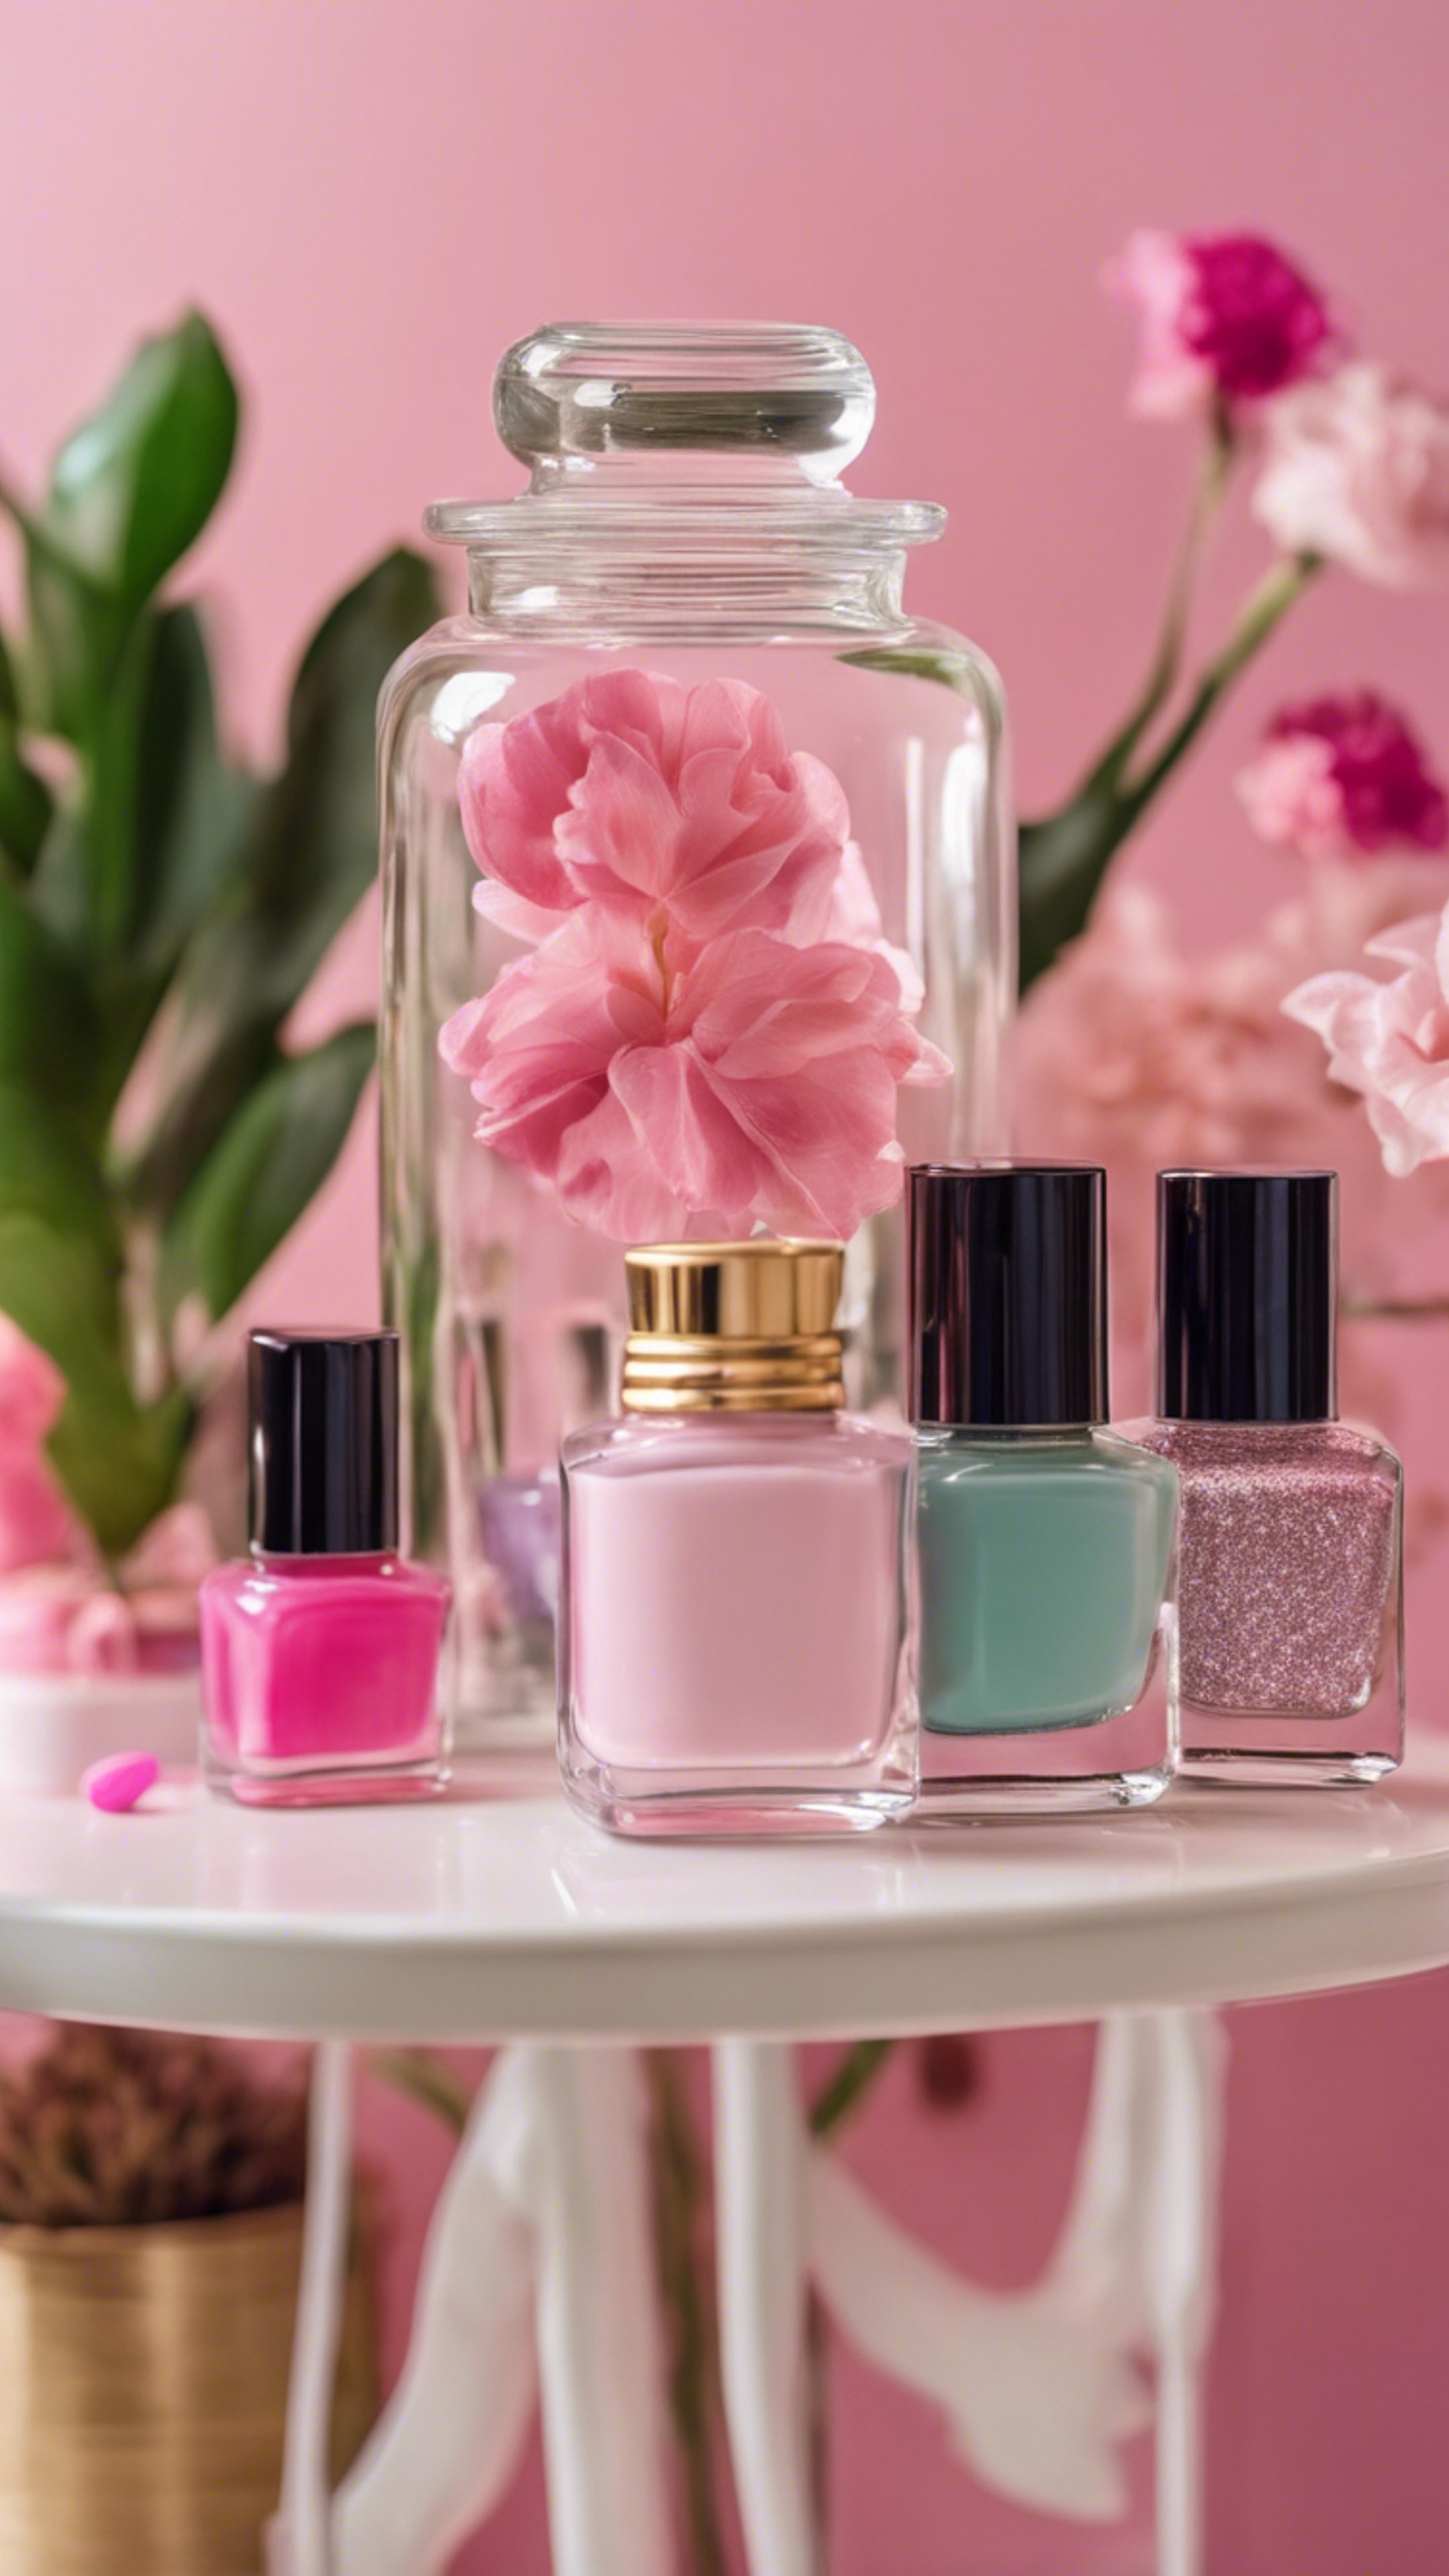 A glass jar full of colorful girly nail polishes on a pink dressing table with a chic plant in the background. Divar kağızı[6e6d72fe0d8e4450902a]